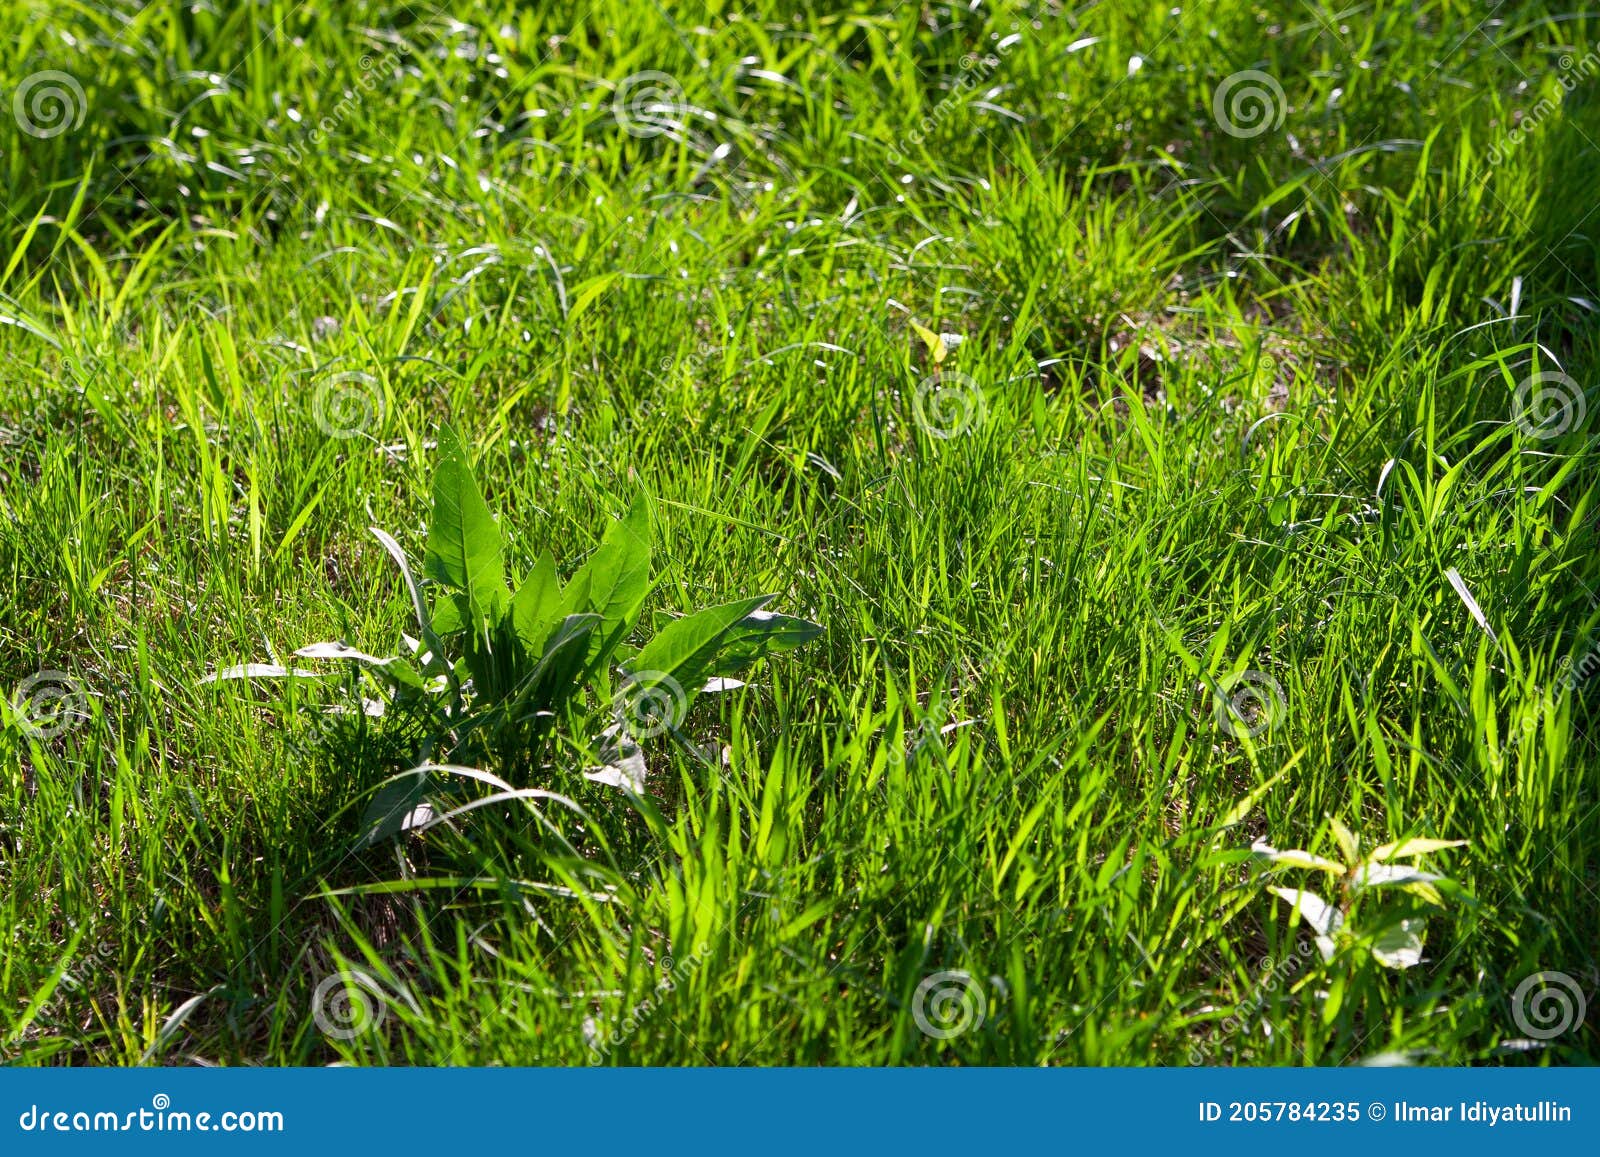 Grass Texture. Sun-drenched Green Grass. Spring Herbs Stock Image